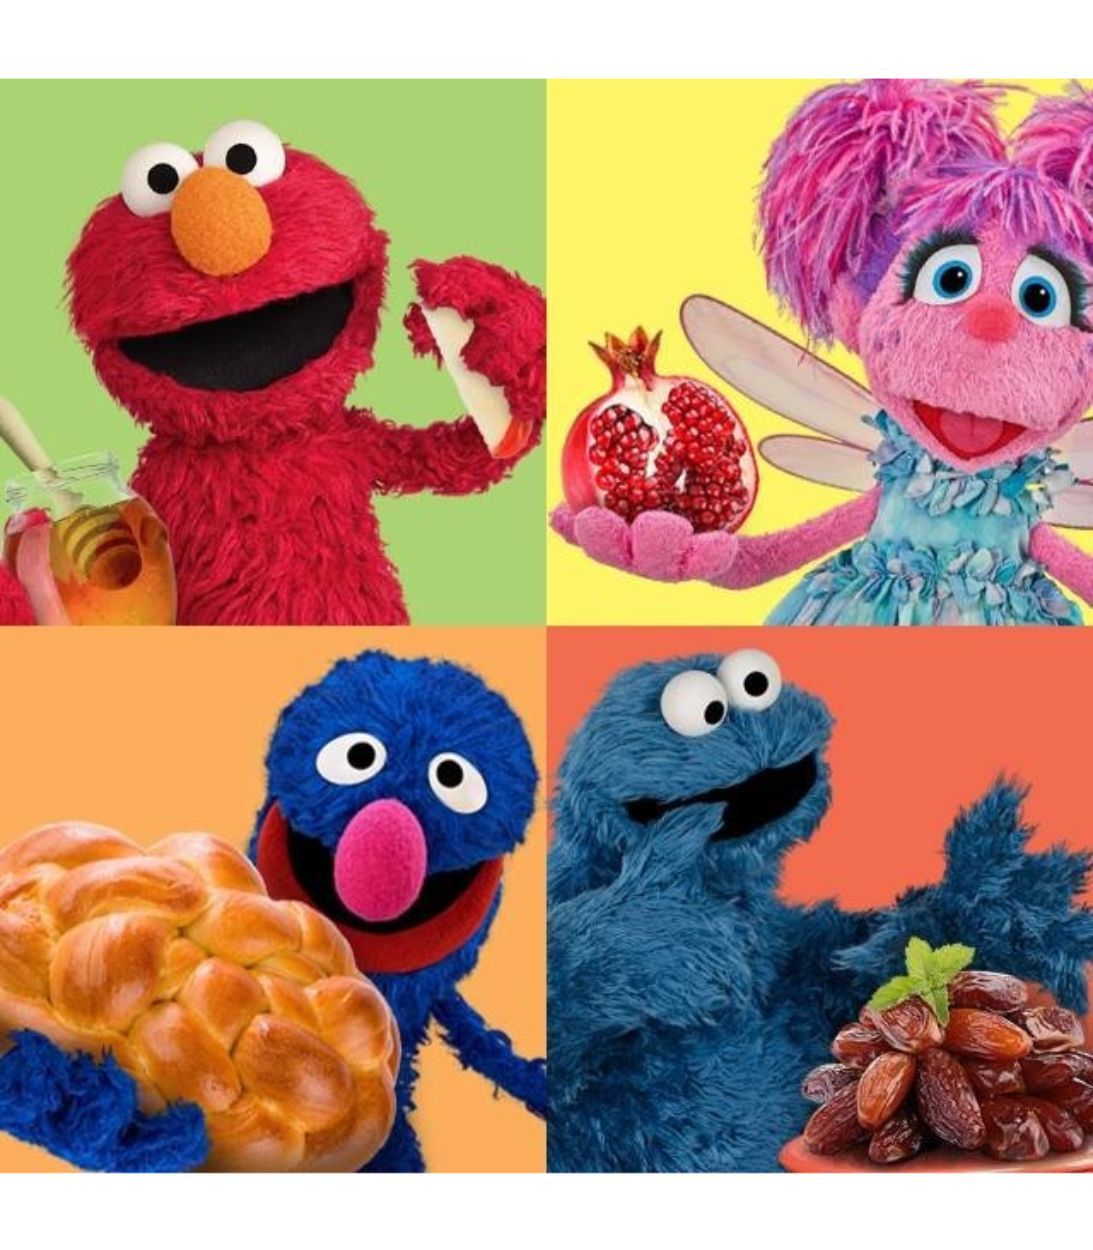 All the Sesame Street characters eat different foods